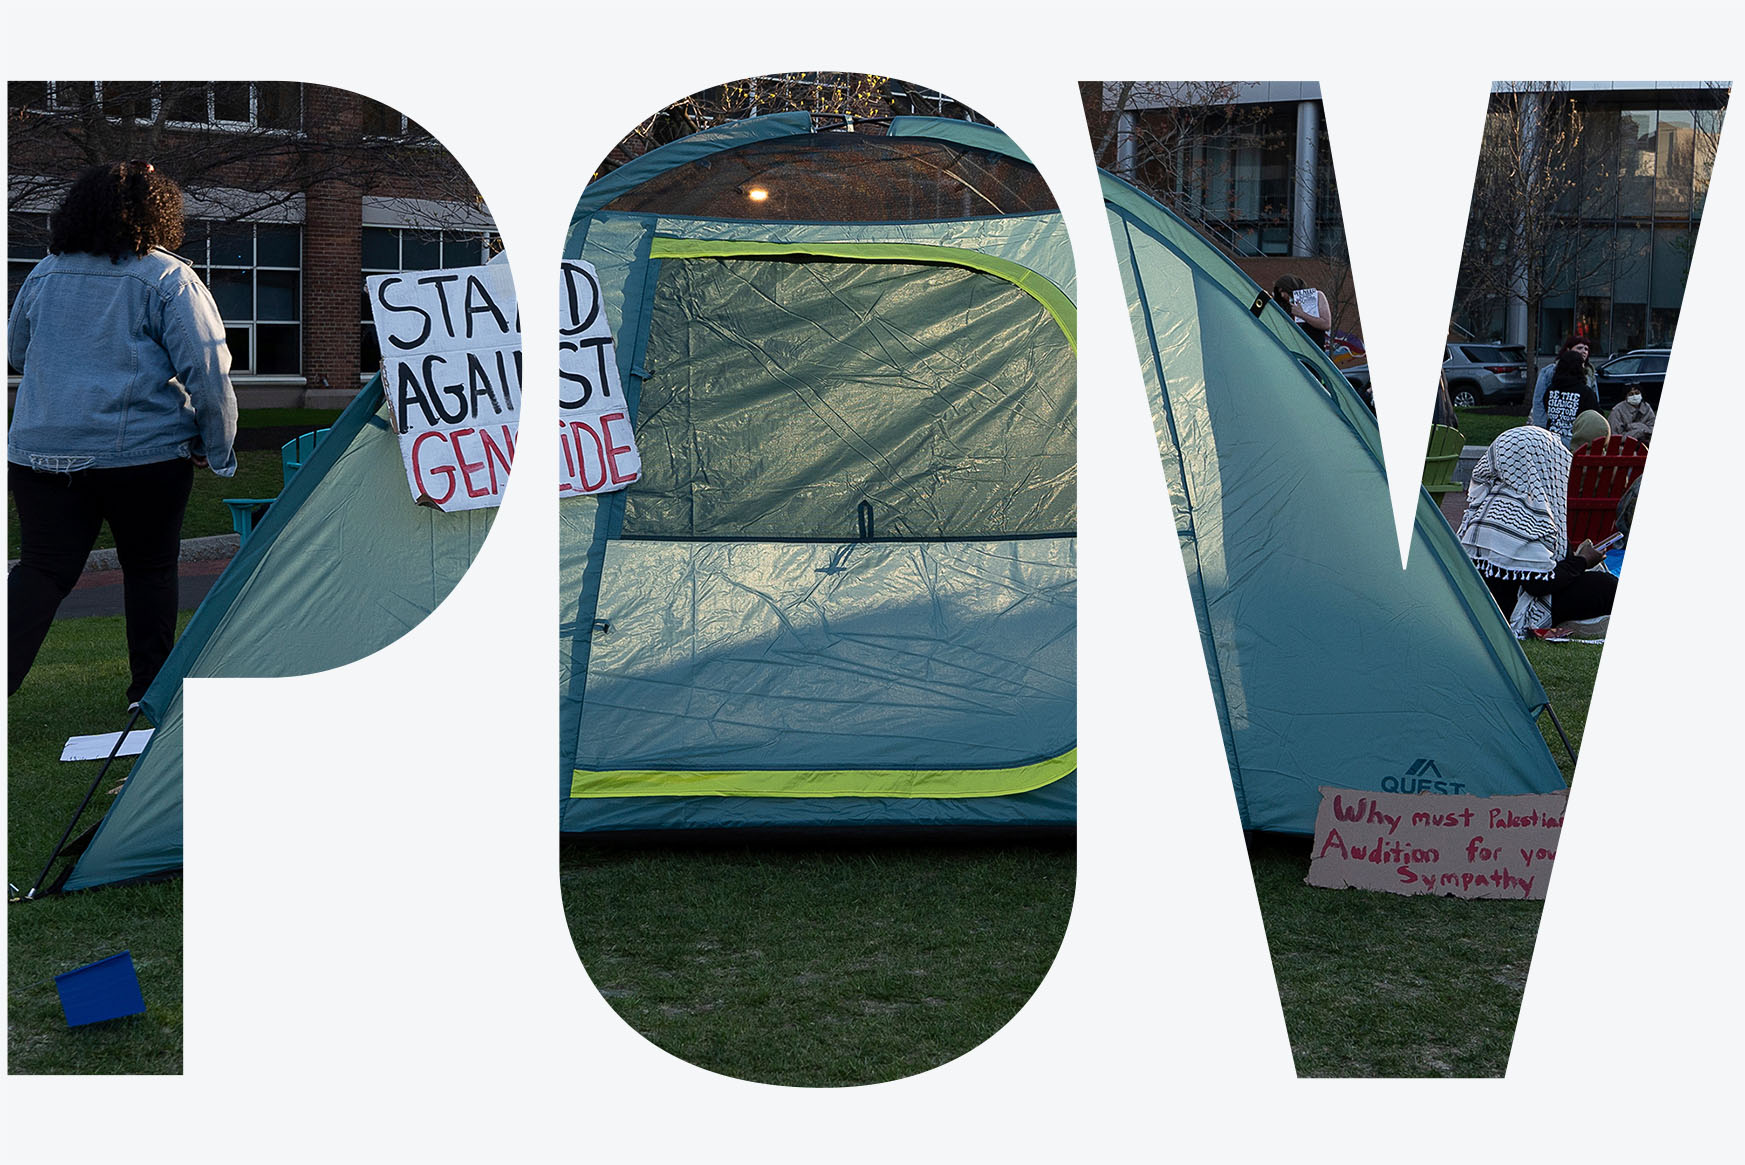 Photo: A picture of a tent with a sign on it that says "Stand Against Genocide." Image overlay has the letters "POV"